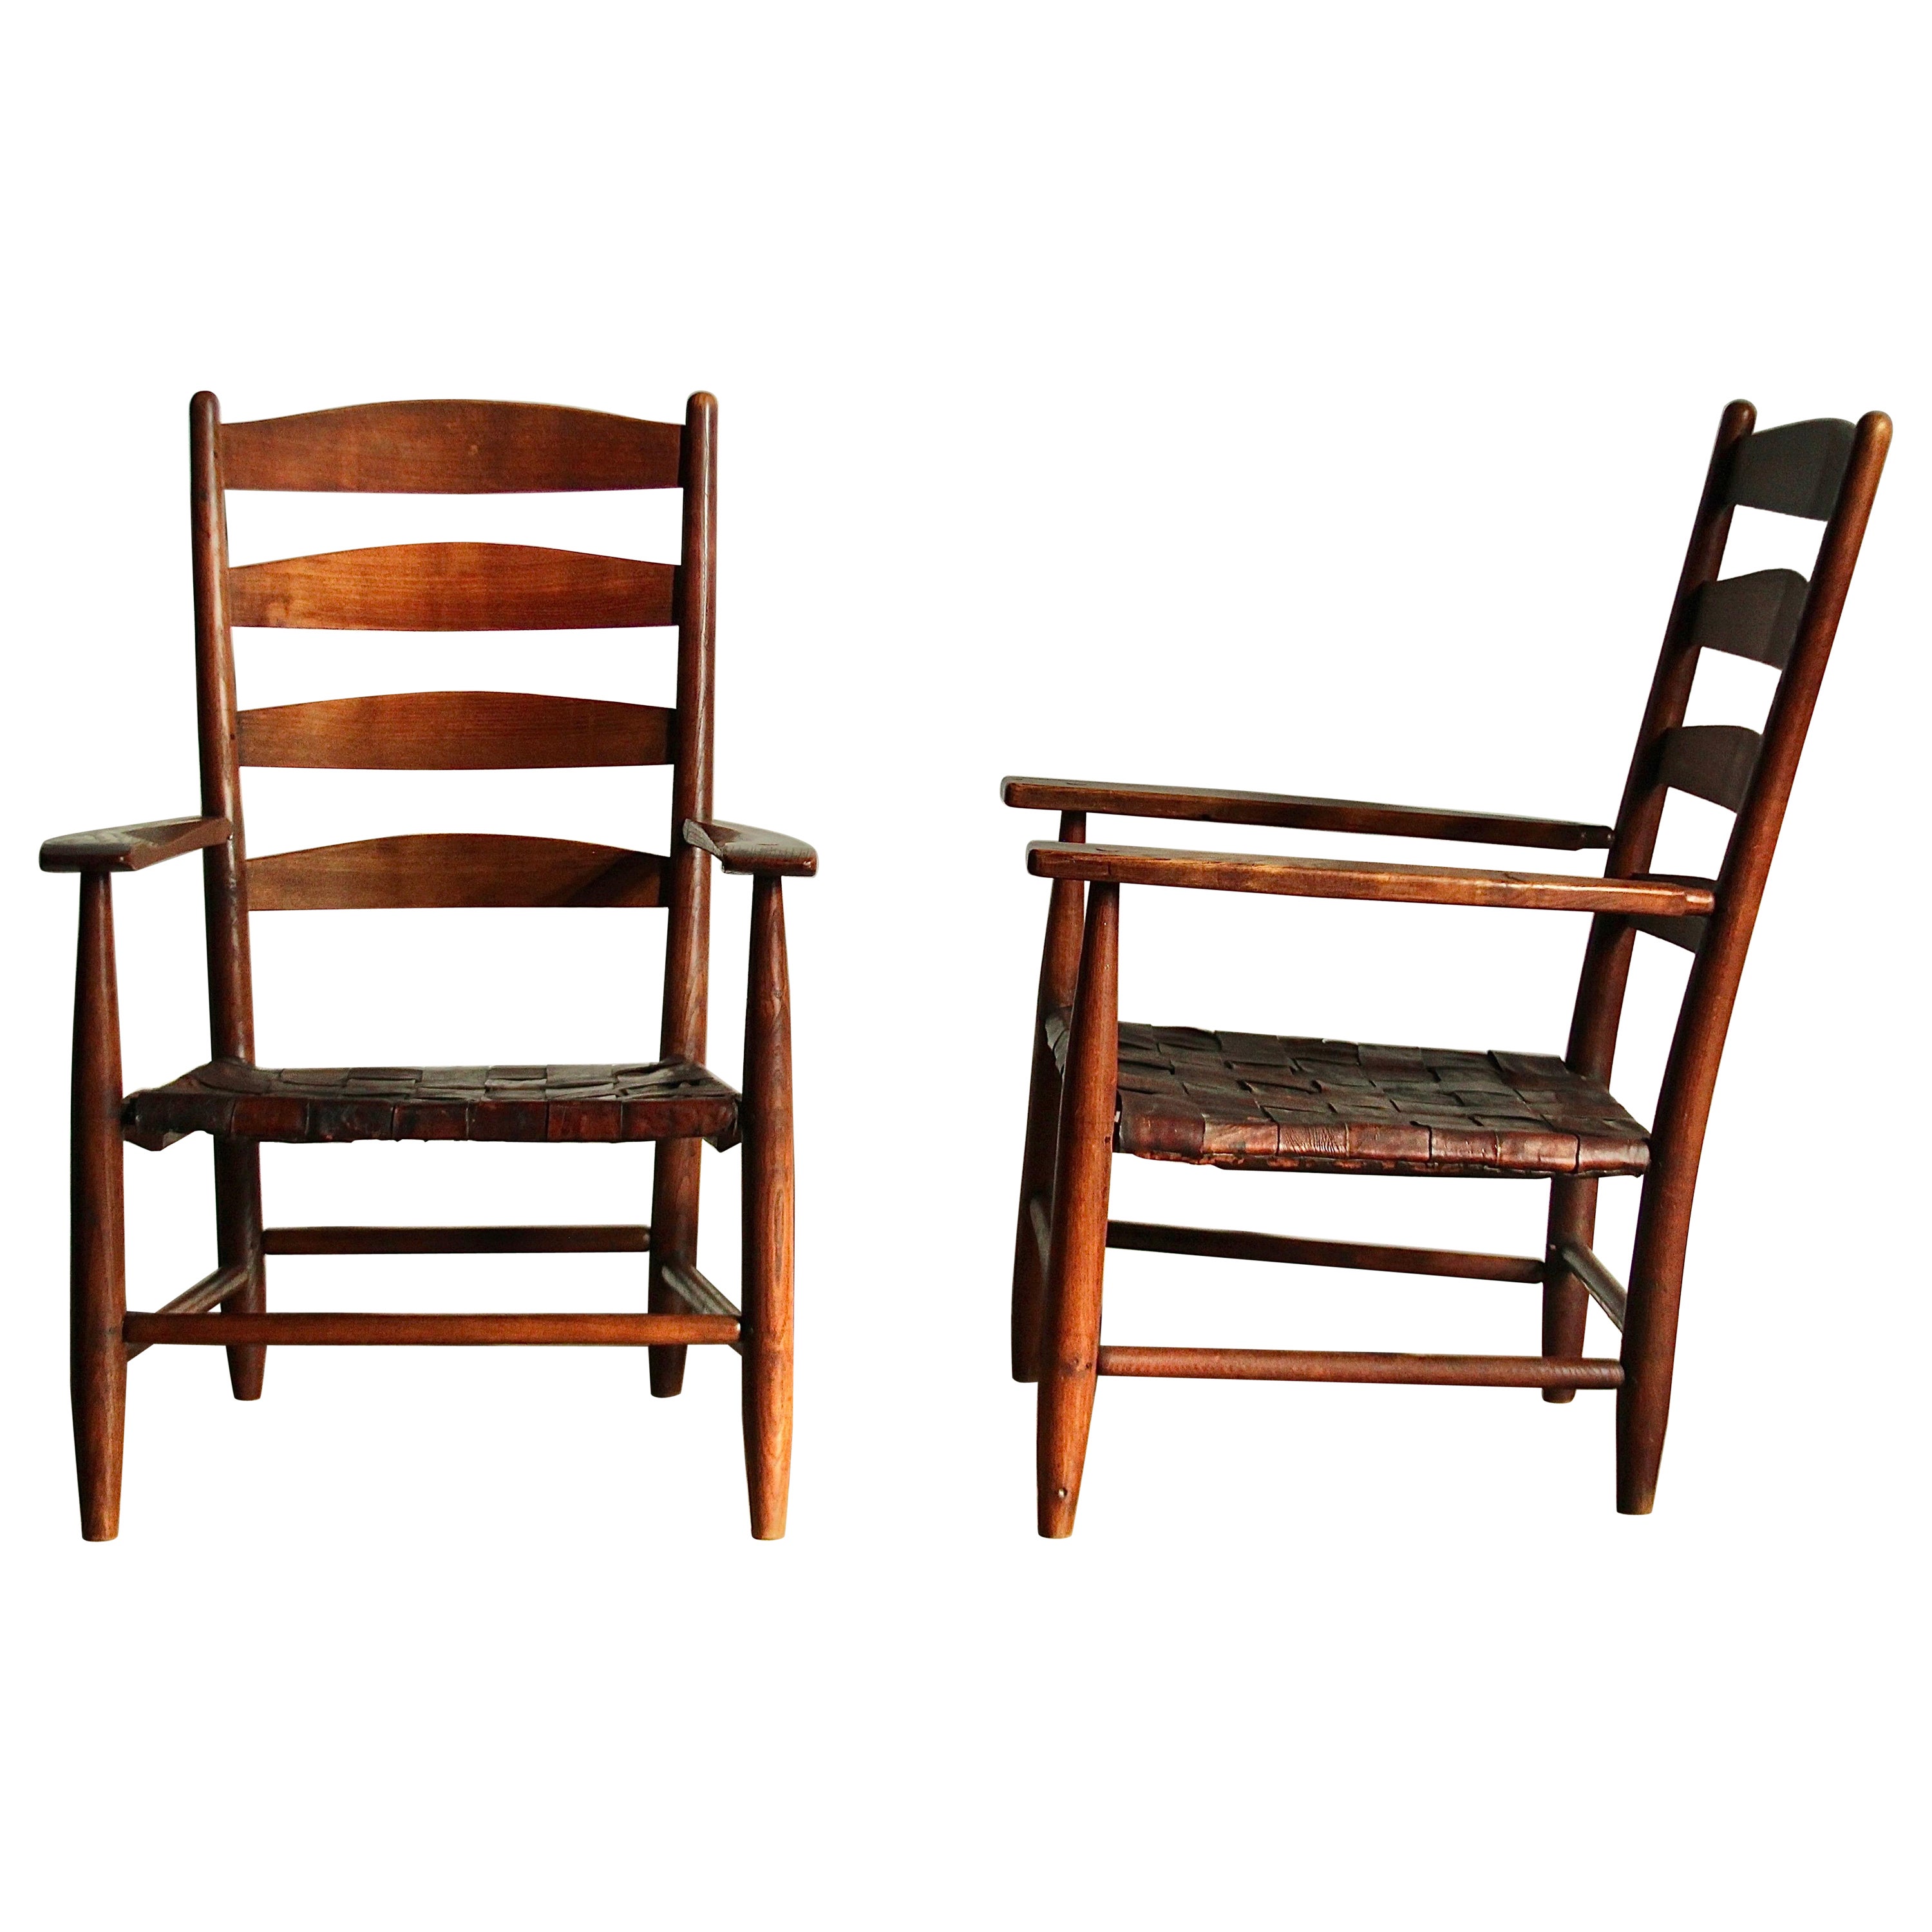 Gordon Russell Hand Built Ladder Back Oak & Woven Leather Lounge Chairs, 1904 For Sale